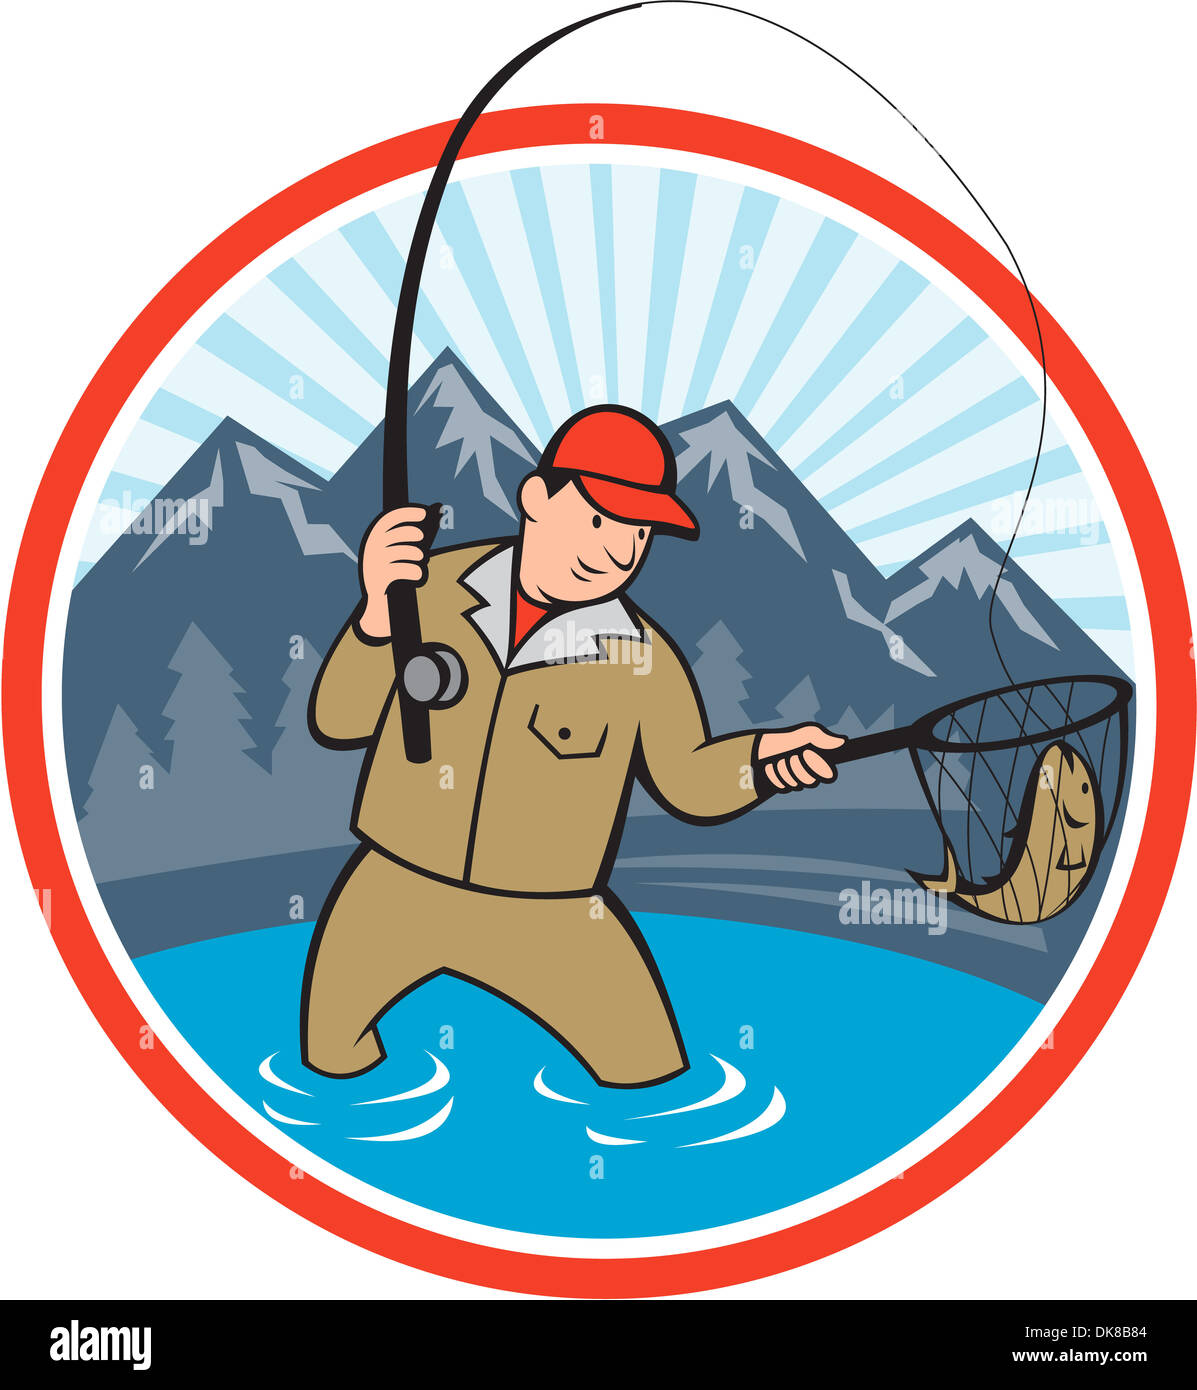 Illustration of a fly fisherman with fly rod and reel reeling and netting  up a trout fish set inside circle with lake, trees and mountain in  background done in cartoon style Stock